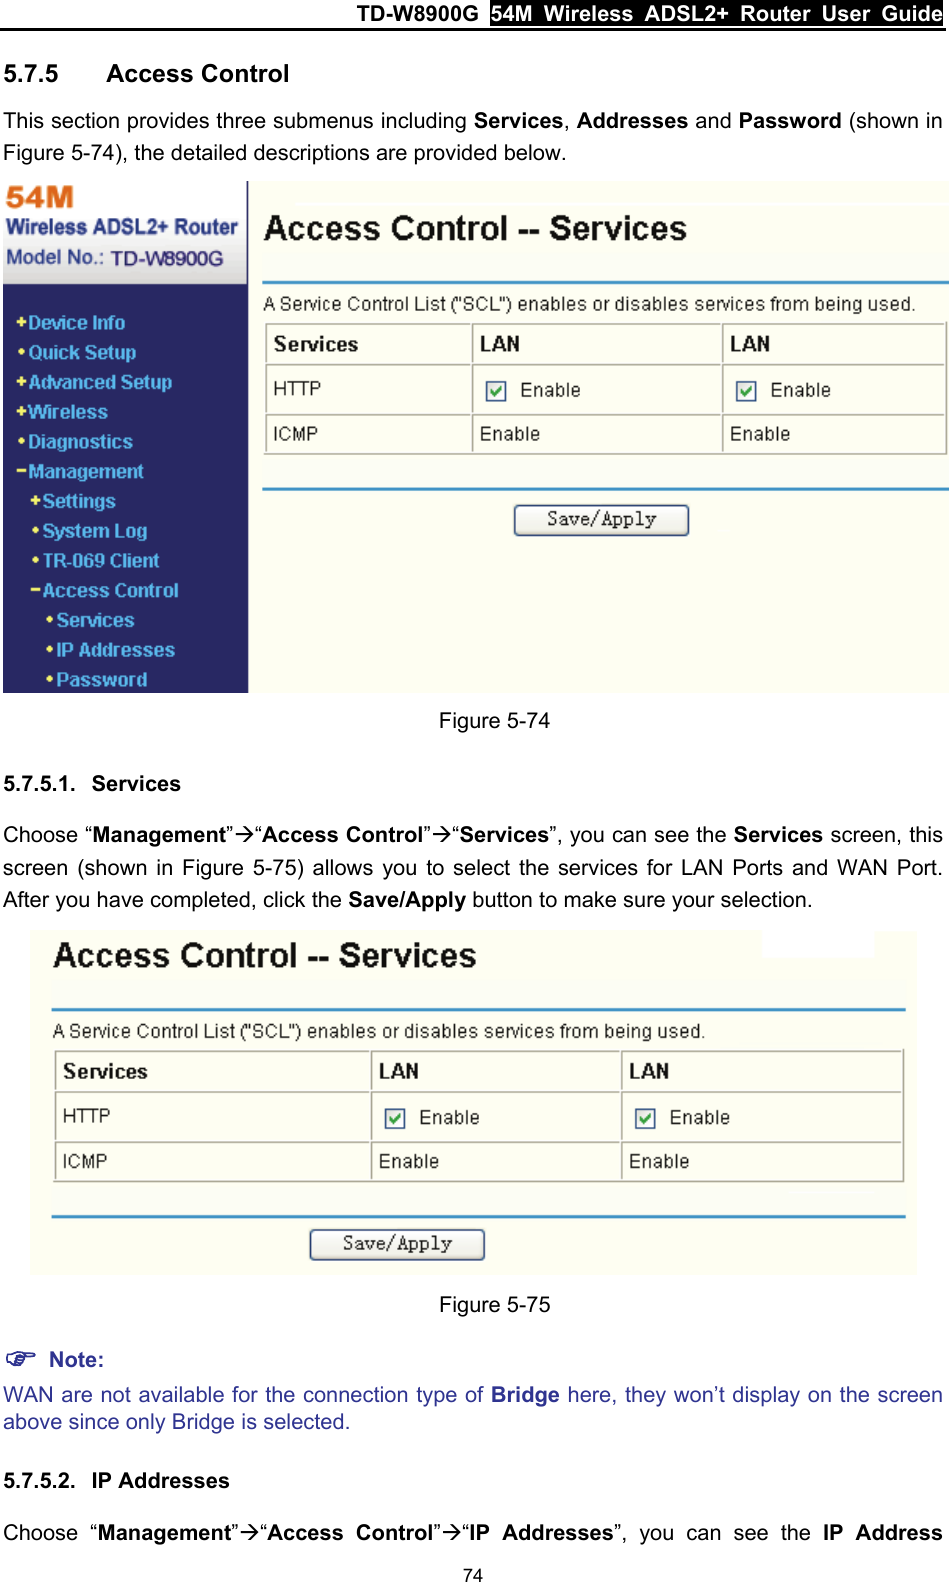 TD-W8900G  54M Wireless ADSL2+ Router User Guide 74 5.7.5  Access Control This section provides three submenus including Services, Addresses and Password (shown in Figure 5-74), the detailed descriptions are provided below.  Figure 5-74 5.7.5.1.  Services Choose “Management”Æ“Access Control”Æ“Services”, you can see the Services screen, this screen (shown in Figure 5-75) allows you to select the services for LAN Ports and WAN Port. After you have completed, click the Save/Apply button to make sure your selection.  Figure 5-75 ) Note: WAN are not available for the connection type of Bridge here, they won’t display on the screen above since only Bridge is selected. 5.7.5.2.  IP Addresses Choose “Management”Æ“Access Control”Æ“IP Addresses”, you can see the IP Address 